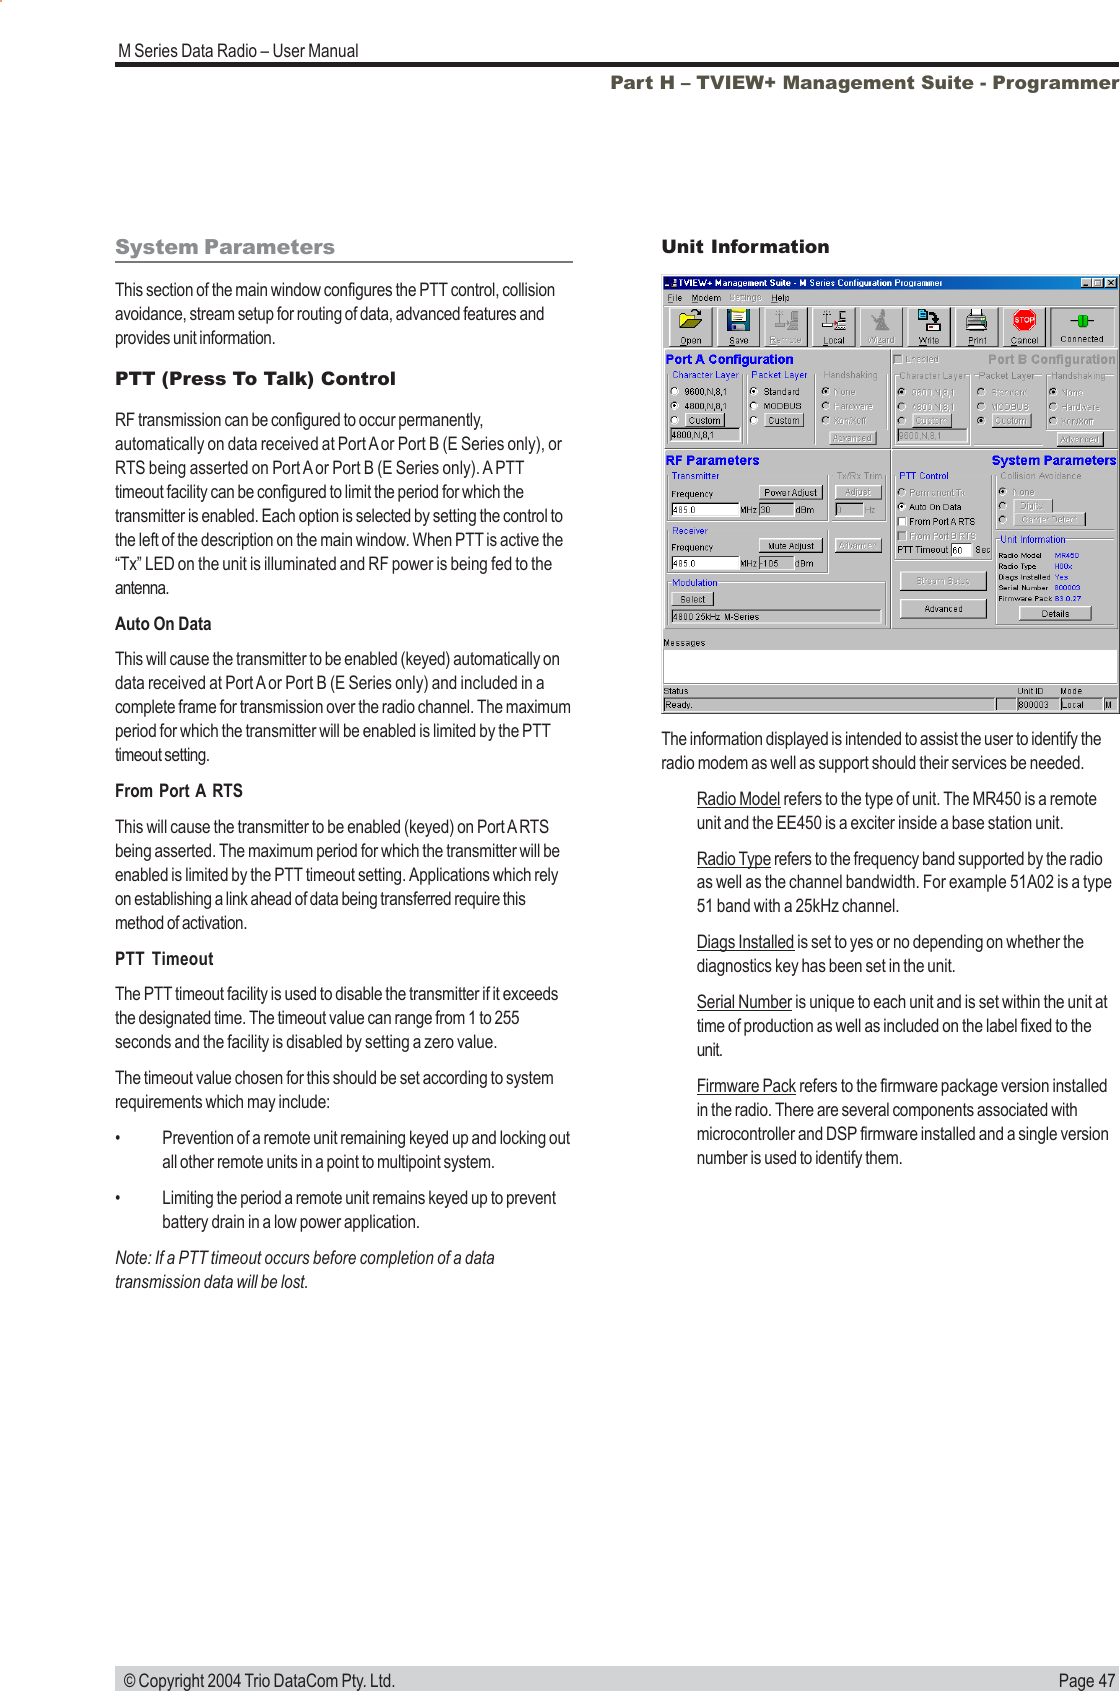 Page 47M Series Data Radio – User Manual © Copyright 2004 Trio DataCom Pty. Ltd.System ParametersThis section of the main window configures the PTT control, collisionavoidance, stream setup for routing of data, advanced features andprovides unit information.PTT (Press To Talk) ControlRF transmission can be configured to occur permanently,automatically on data received at Port A or Port B (E Series only), orRTS being asserted on Port A or Port B (E Series only). A PTTtimeout facility can be configured to limit the period for which thetransmitter is enabled. Each option is selected by setting the control tothe left of the description on the main window. When PTT is active the“Tx” LED on the unit is illuminated and RF power is being fed to theantenna.Auto On DataThis will cause the transmitter to be enabled (keyed) automatically ondata received at Port A or Port B (E Series only) and included in acomplete frame for transmission over the radio channel. The maximumperiod for which the transmitter will be enabled is limited by the PTTtimeout setting.From Port A RTSThis will cause the transmitter to be enabled (keyed) on Port A RTSbeing asserted. The maximum period for which the transmitter will beenabled is limited by the PTT timeout setting. Applications which relyon establishing a link ahead of data being transferred require thismethod of activation.PTT TimeoutThe PTT timeout facility is used to disable the transmitter if it exceedsthe designated time. The timeout value can range from 1 to 255seconds and the facility is disabled by setting a zero value.The timeout value chosen for this should be set according to systemrequirements which may include:• Prevention of a remote unit remaining keyed up and locking outall other remote units in a point to multipoint system.• Limiting the period a remote unit remains keyed up to preventbattery drain in a low power application.Note: If a PTT timeout occurs before completion of a datatransmission data will be lost.Part H – TVIEW+ Management Suite - ProgrammerThe information displayed is intended to assist the user to identify theradio modem as well as support should their services be needed.Radio Model refers to the type of unit. The MR450 is a remoteunit and the EE450 is a exciter inside a base station unit.Radio Type refers to the frequency band supported by the radioas well as the channel bandwidth. For example 51A02 is a type51 band with a 25kHz channel.Diags Installed is set to yes or no depending on whether thediagnostics key has been set in the unit.Serial Number is unique to each unit and is set within the unit attime of production as well as included on the label fixed to theunit.Firmware Pack refers to the firmware package version installedin the radio. There are several components associated withmicrocontroller and DSP firmware installed and a single versionnumber is used to identify them.Unit Information